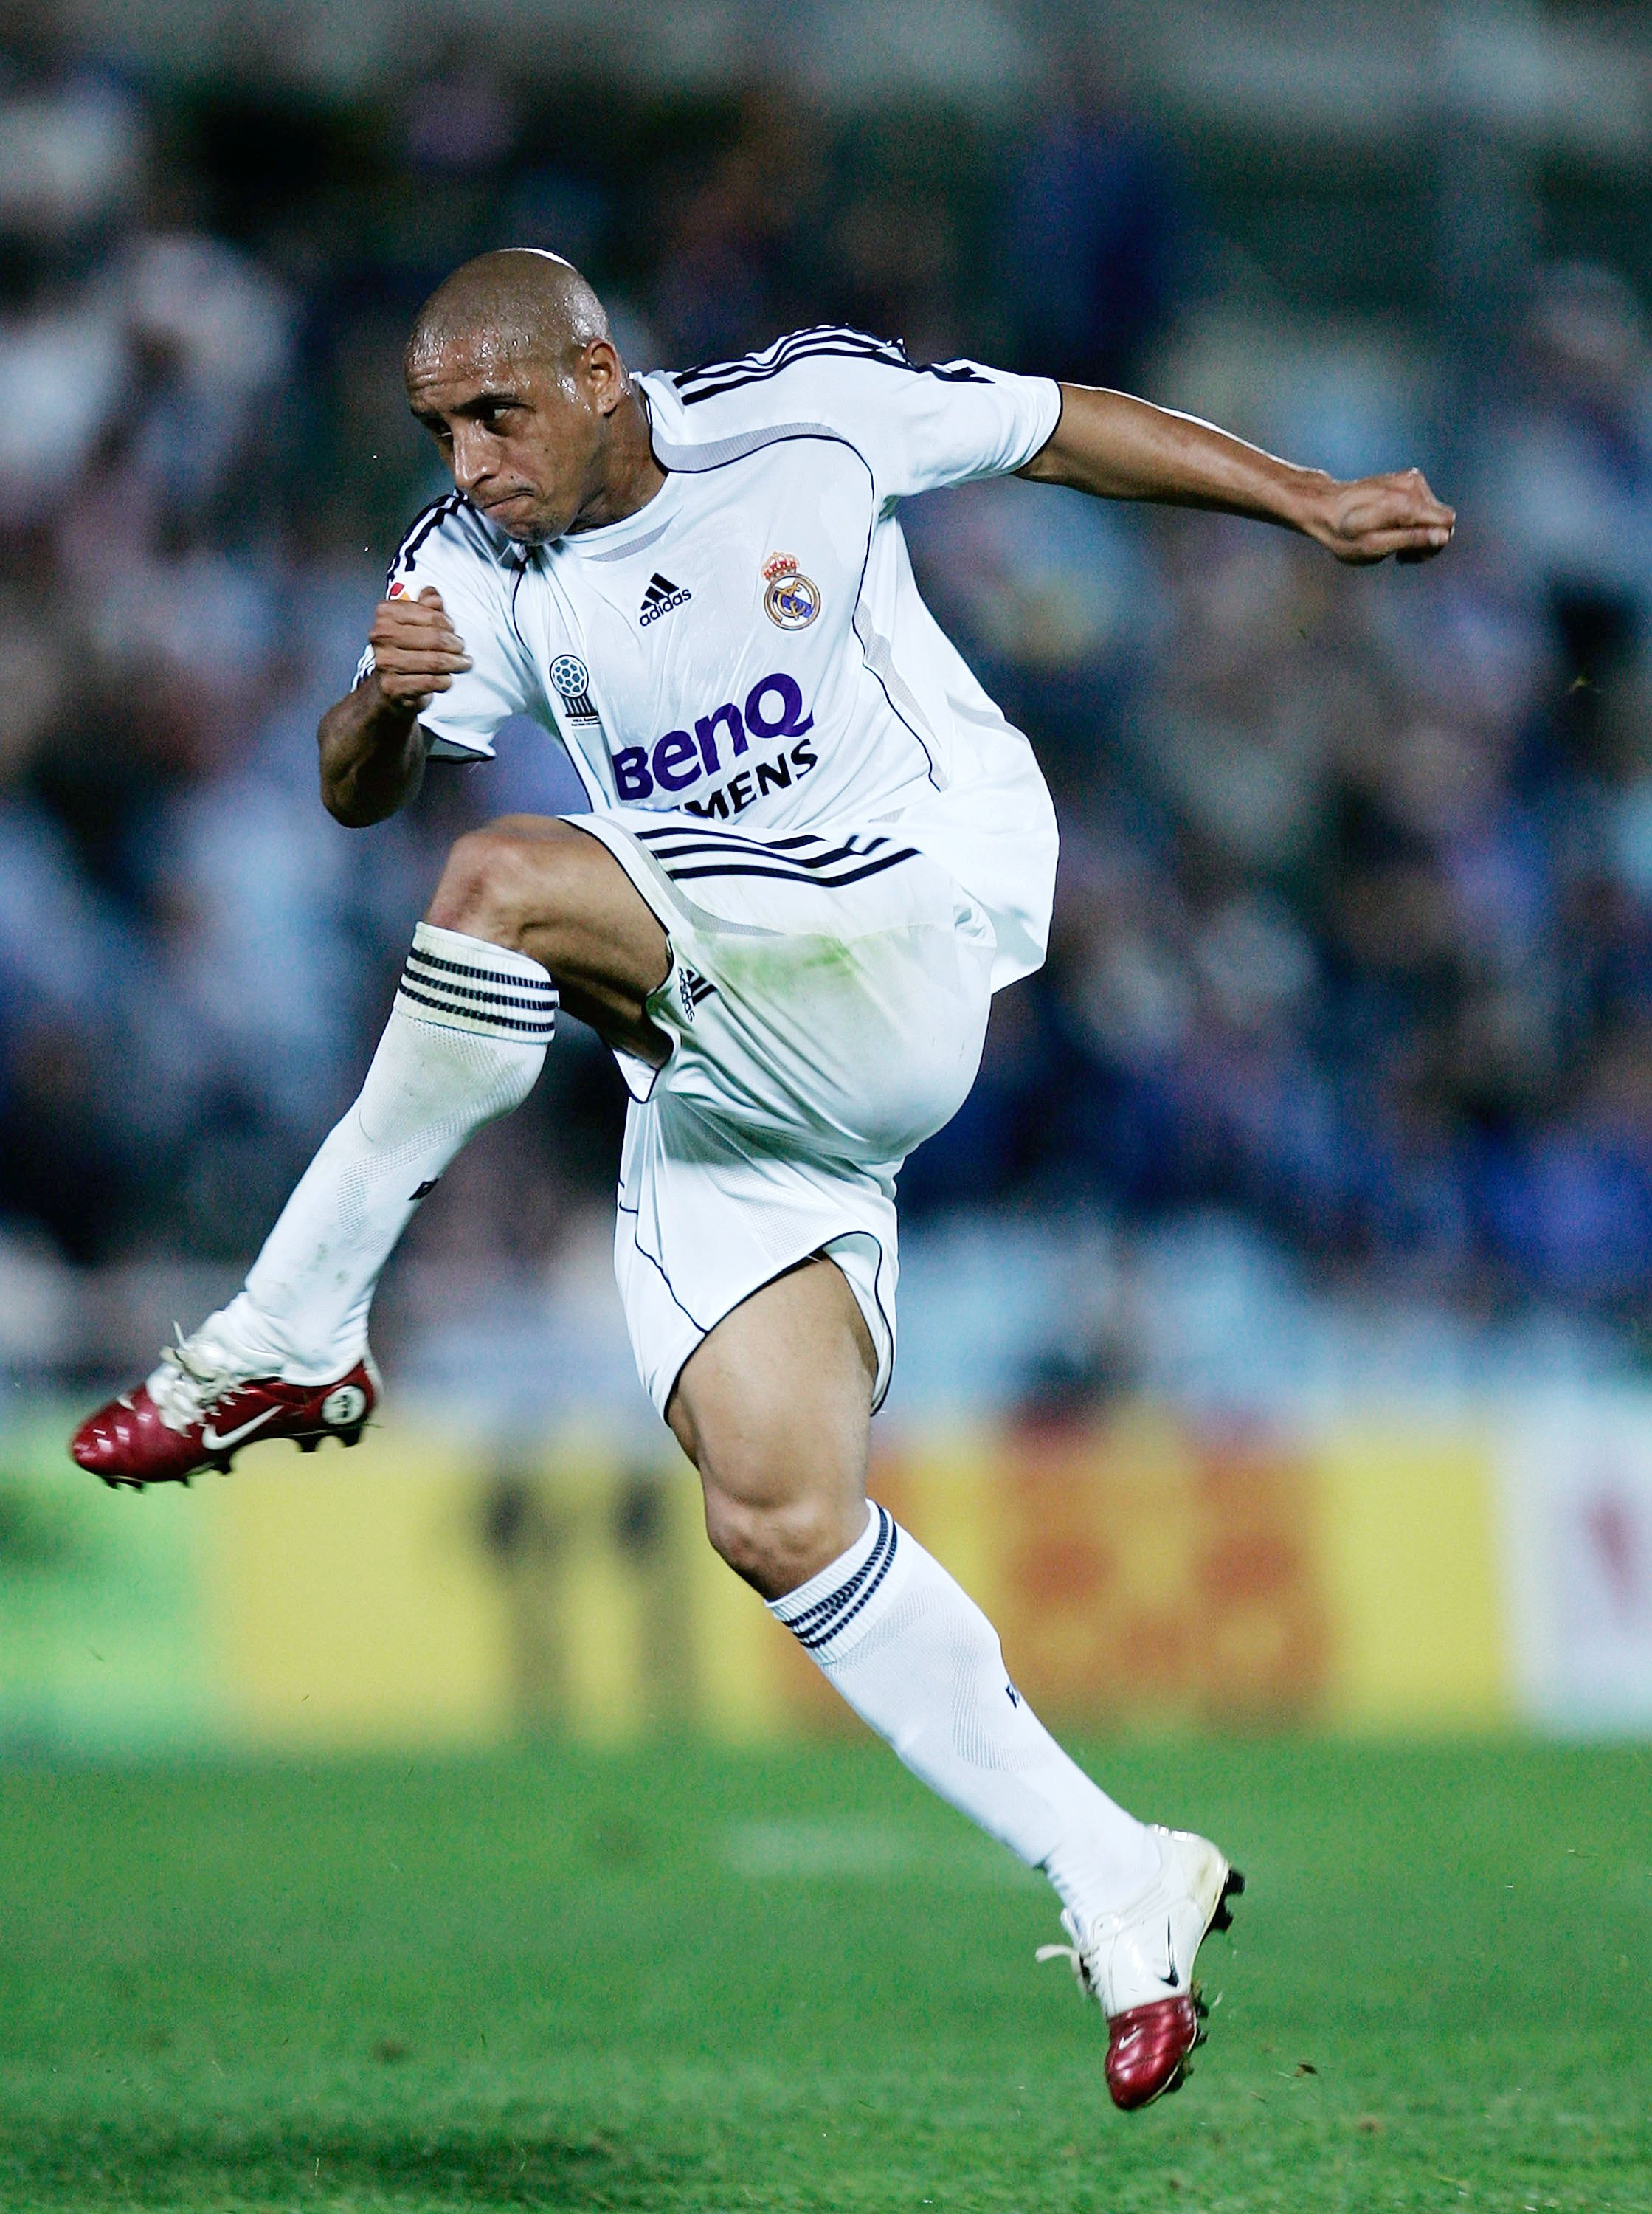 MADRID, SPAIN - OCTOBER 14:  Roberto Carlos of Real Madrid shoots a free kick during the Primera Liga match between Getafe and Real Madrid at the Alfonso Perez stadium on October 14, 2006 in Madrid, Spain. Getafe won 1-0.  (Photo by Denis Doyle/Getty Imag